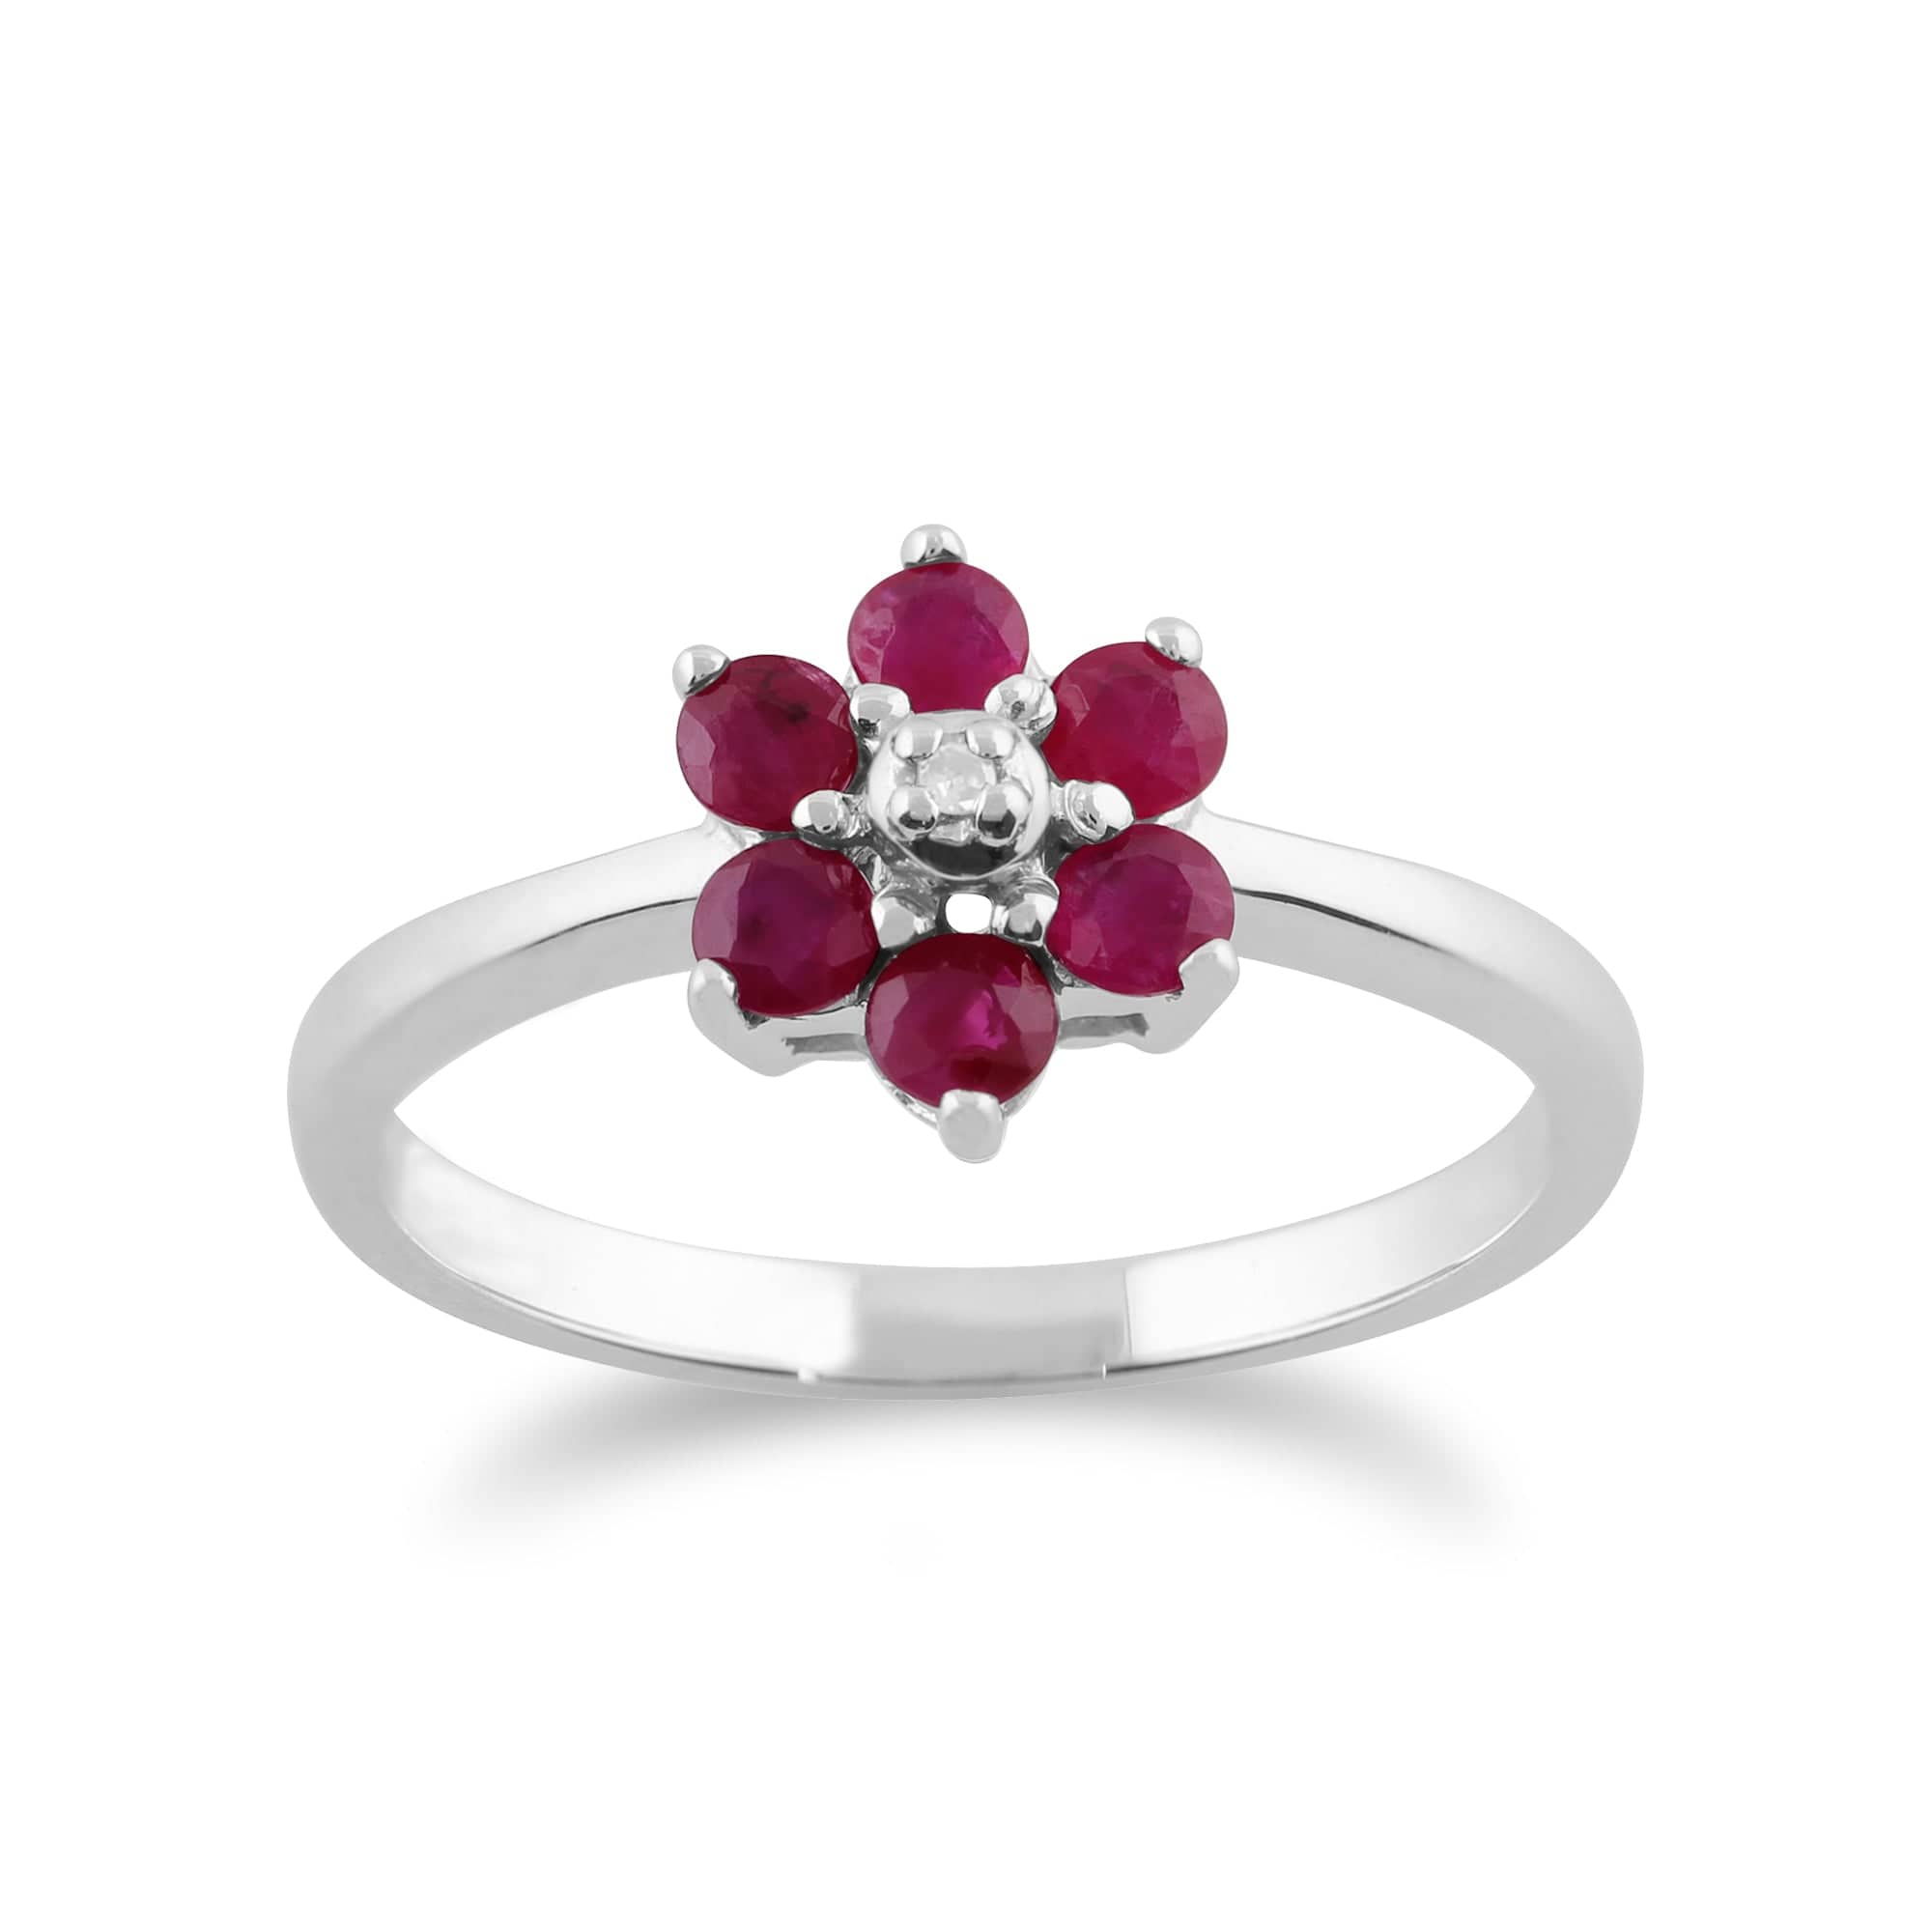 Floral Round Ruby & Diamond Flower Drop Earrings & Ring Set in 9ct White Gold - Gemondo